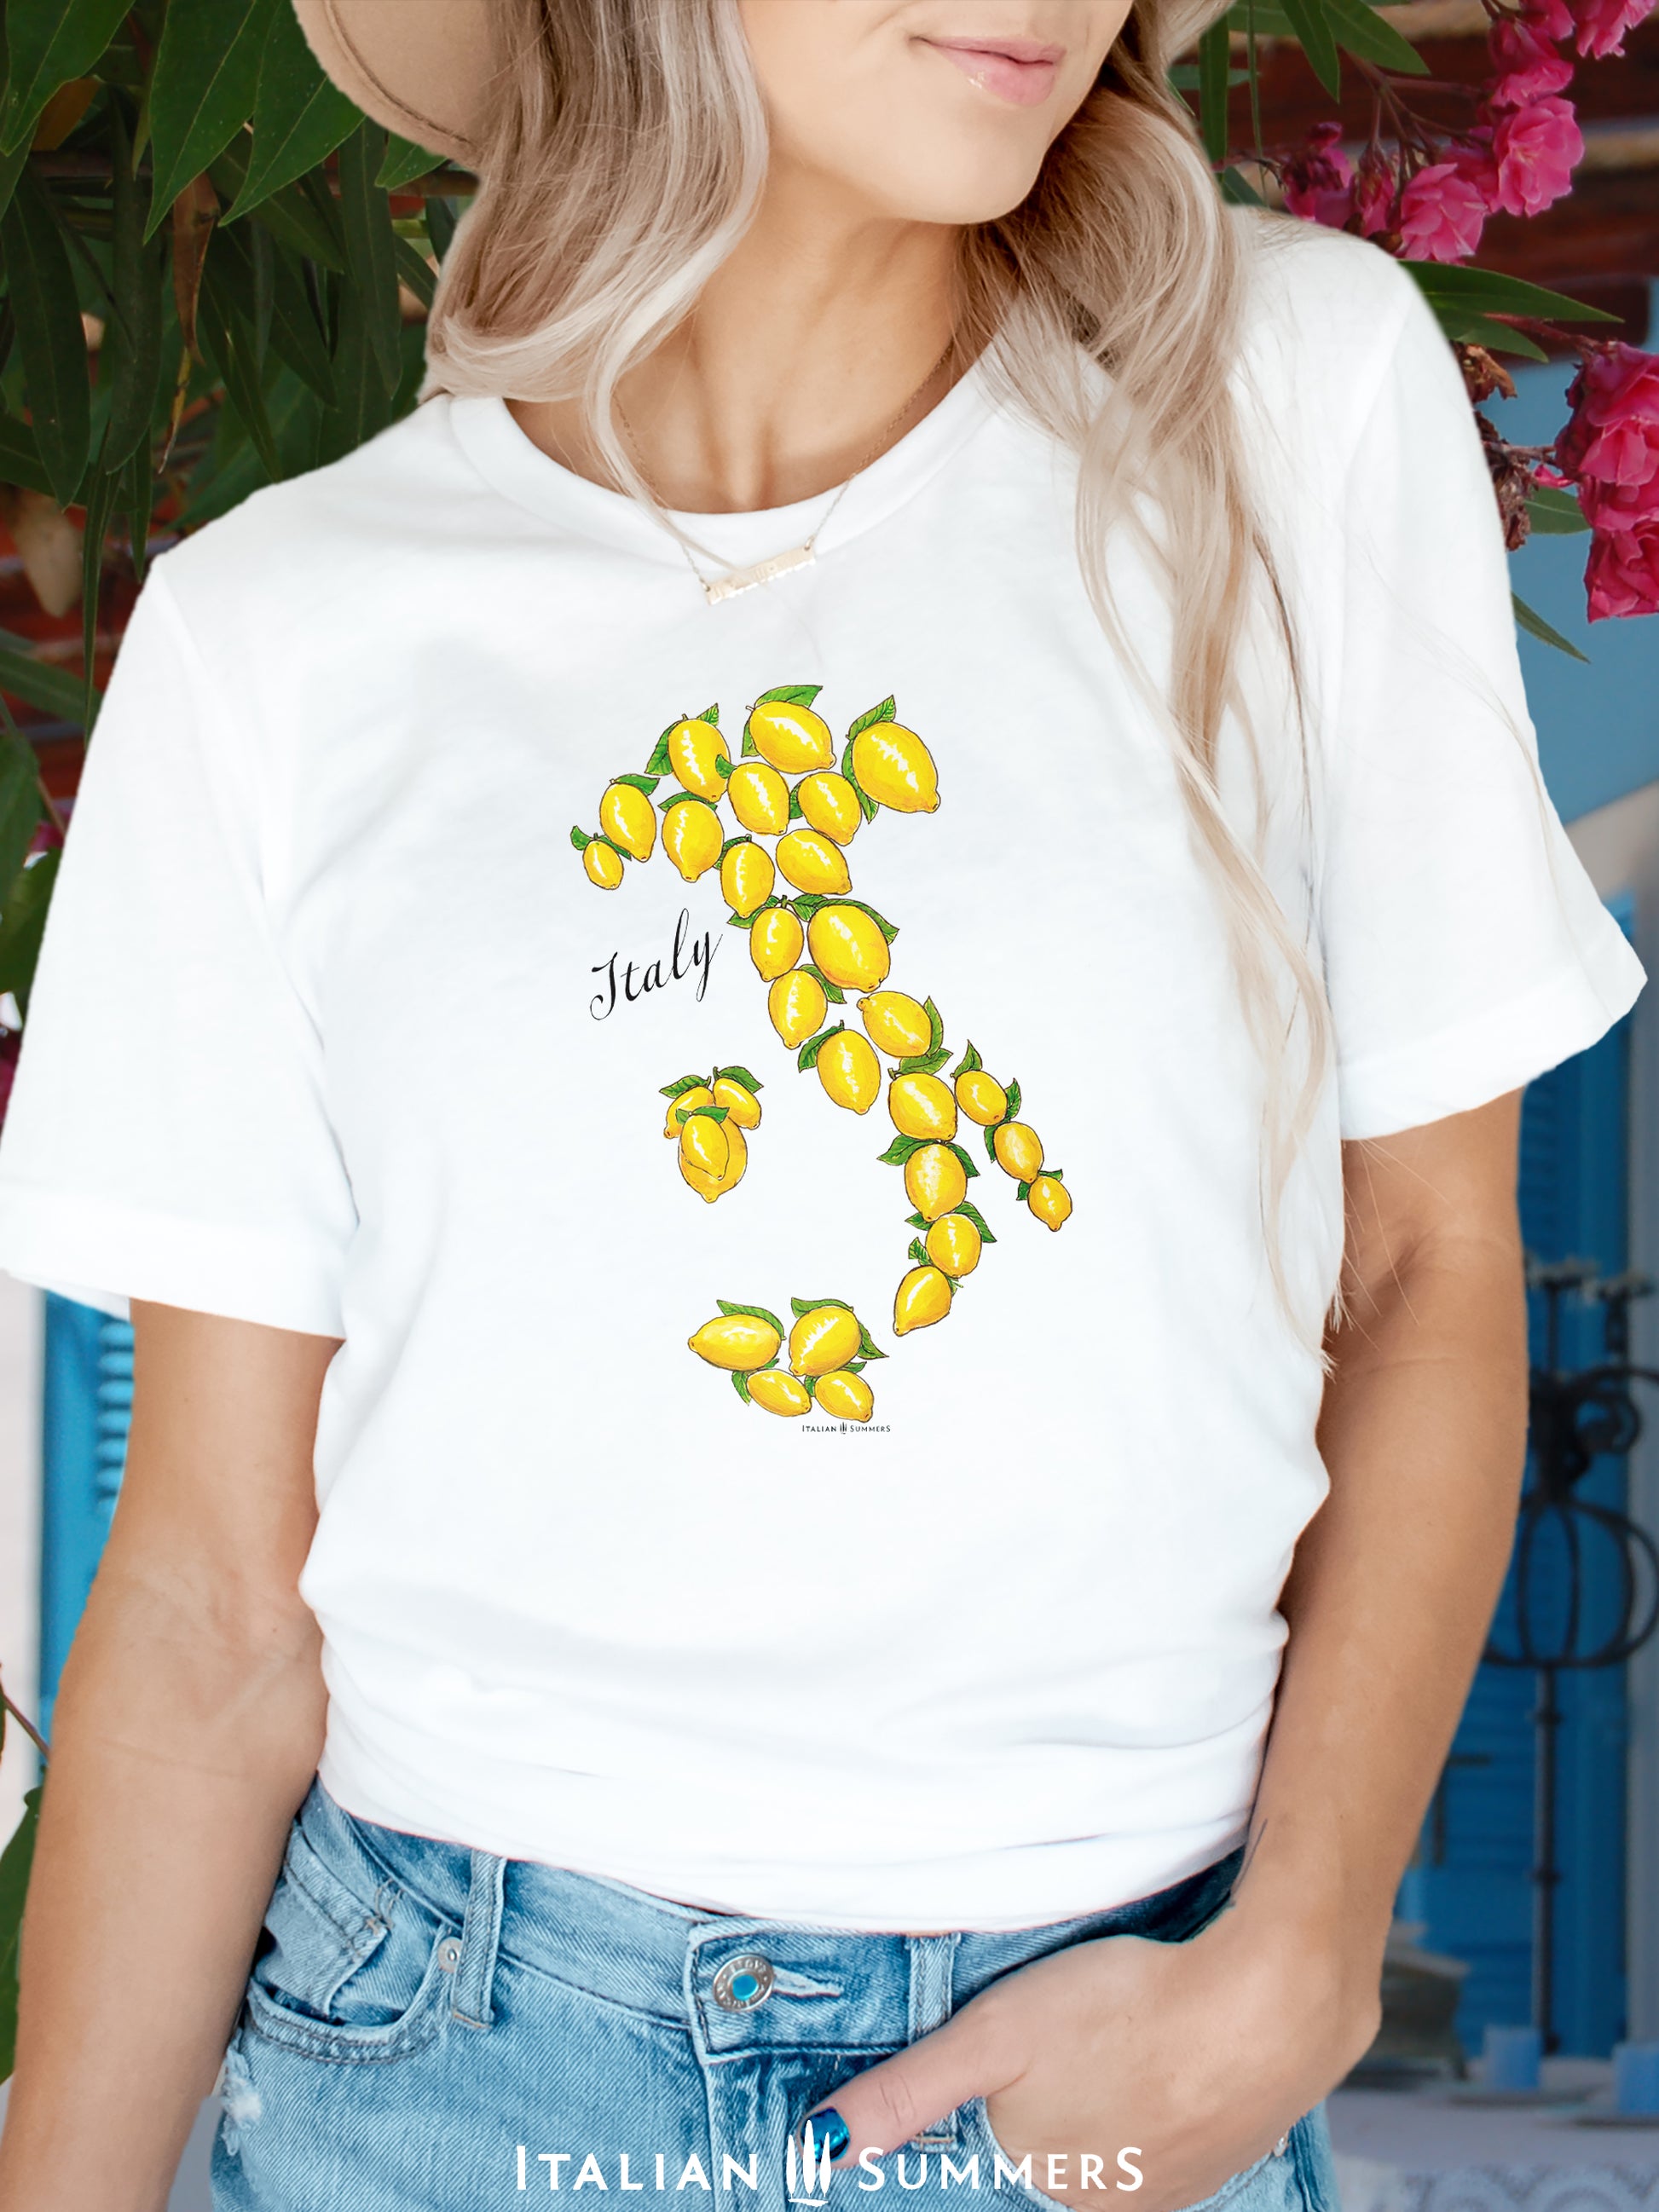 Unisex crew-neck Italy-inspire cotton T shirt with a print of the shape of the country of Italy composed of sunny Sorrento Lemons, an original design by Italian Summers